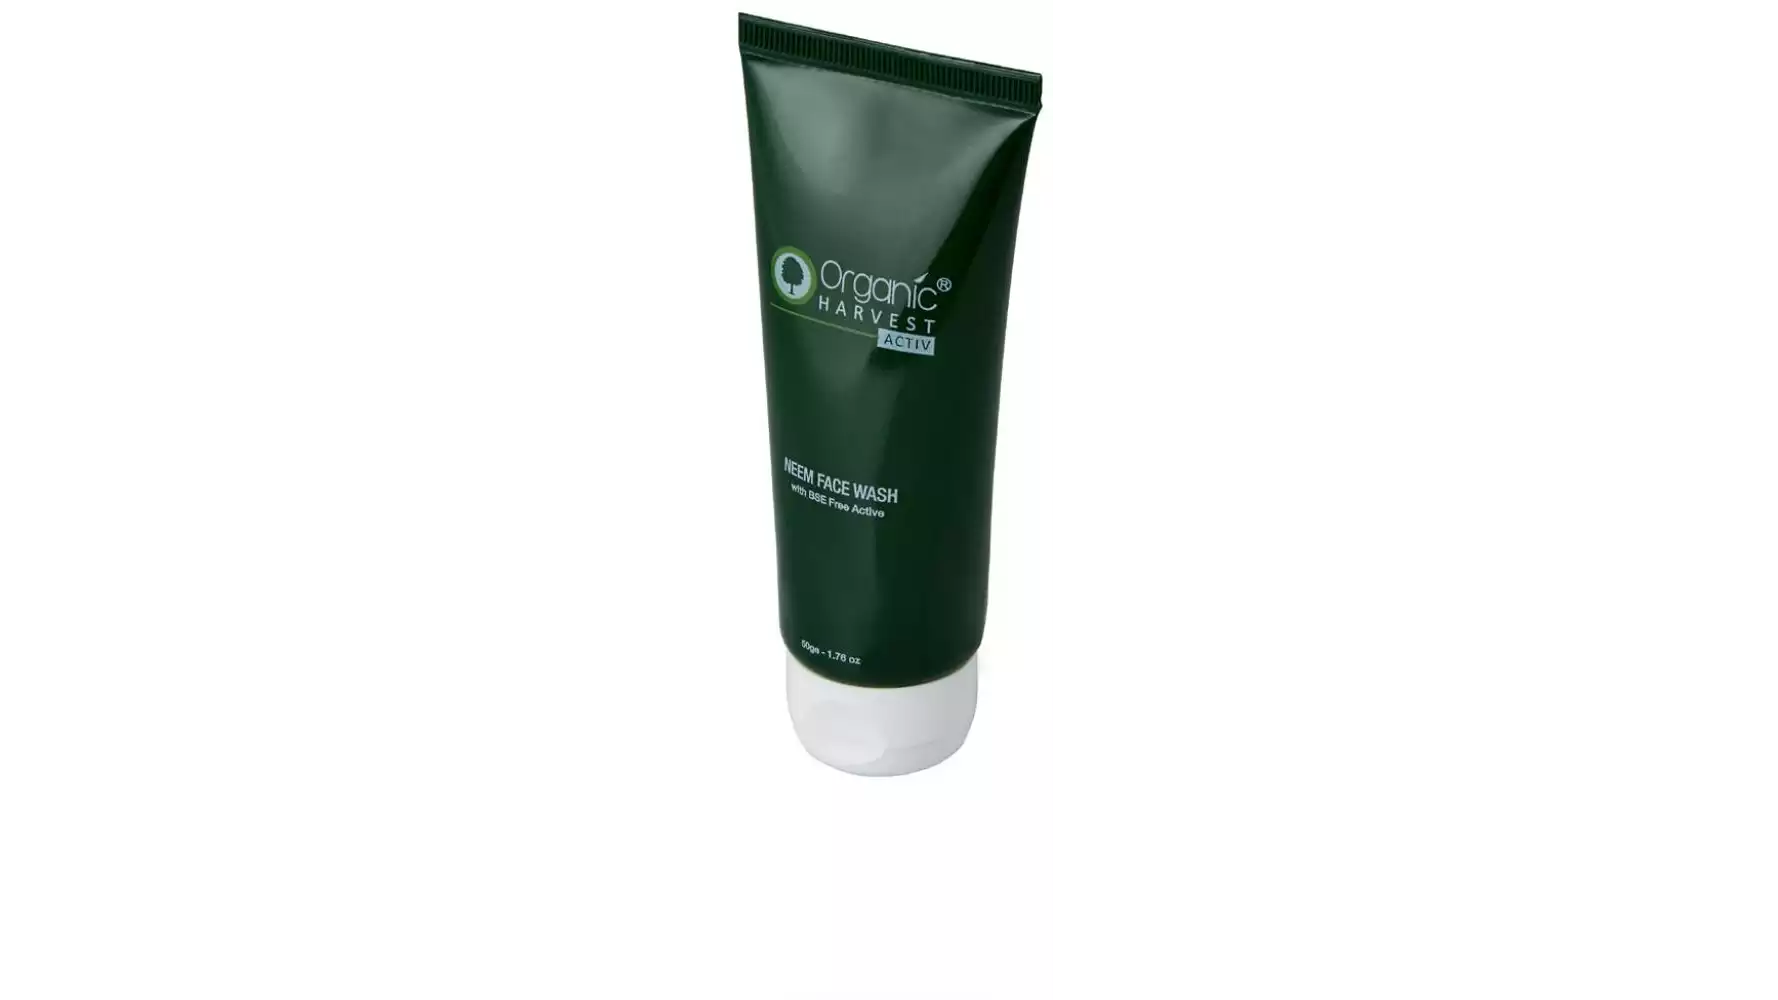 Organic Harvest Neem Face Wash (BSE Free Active) (50g)